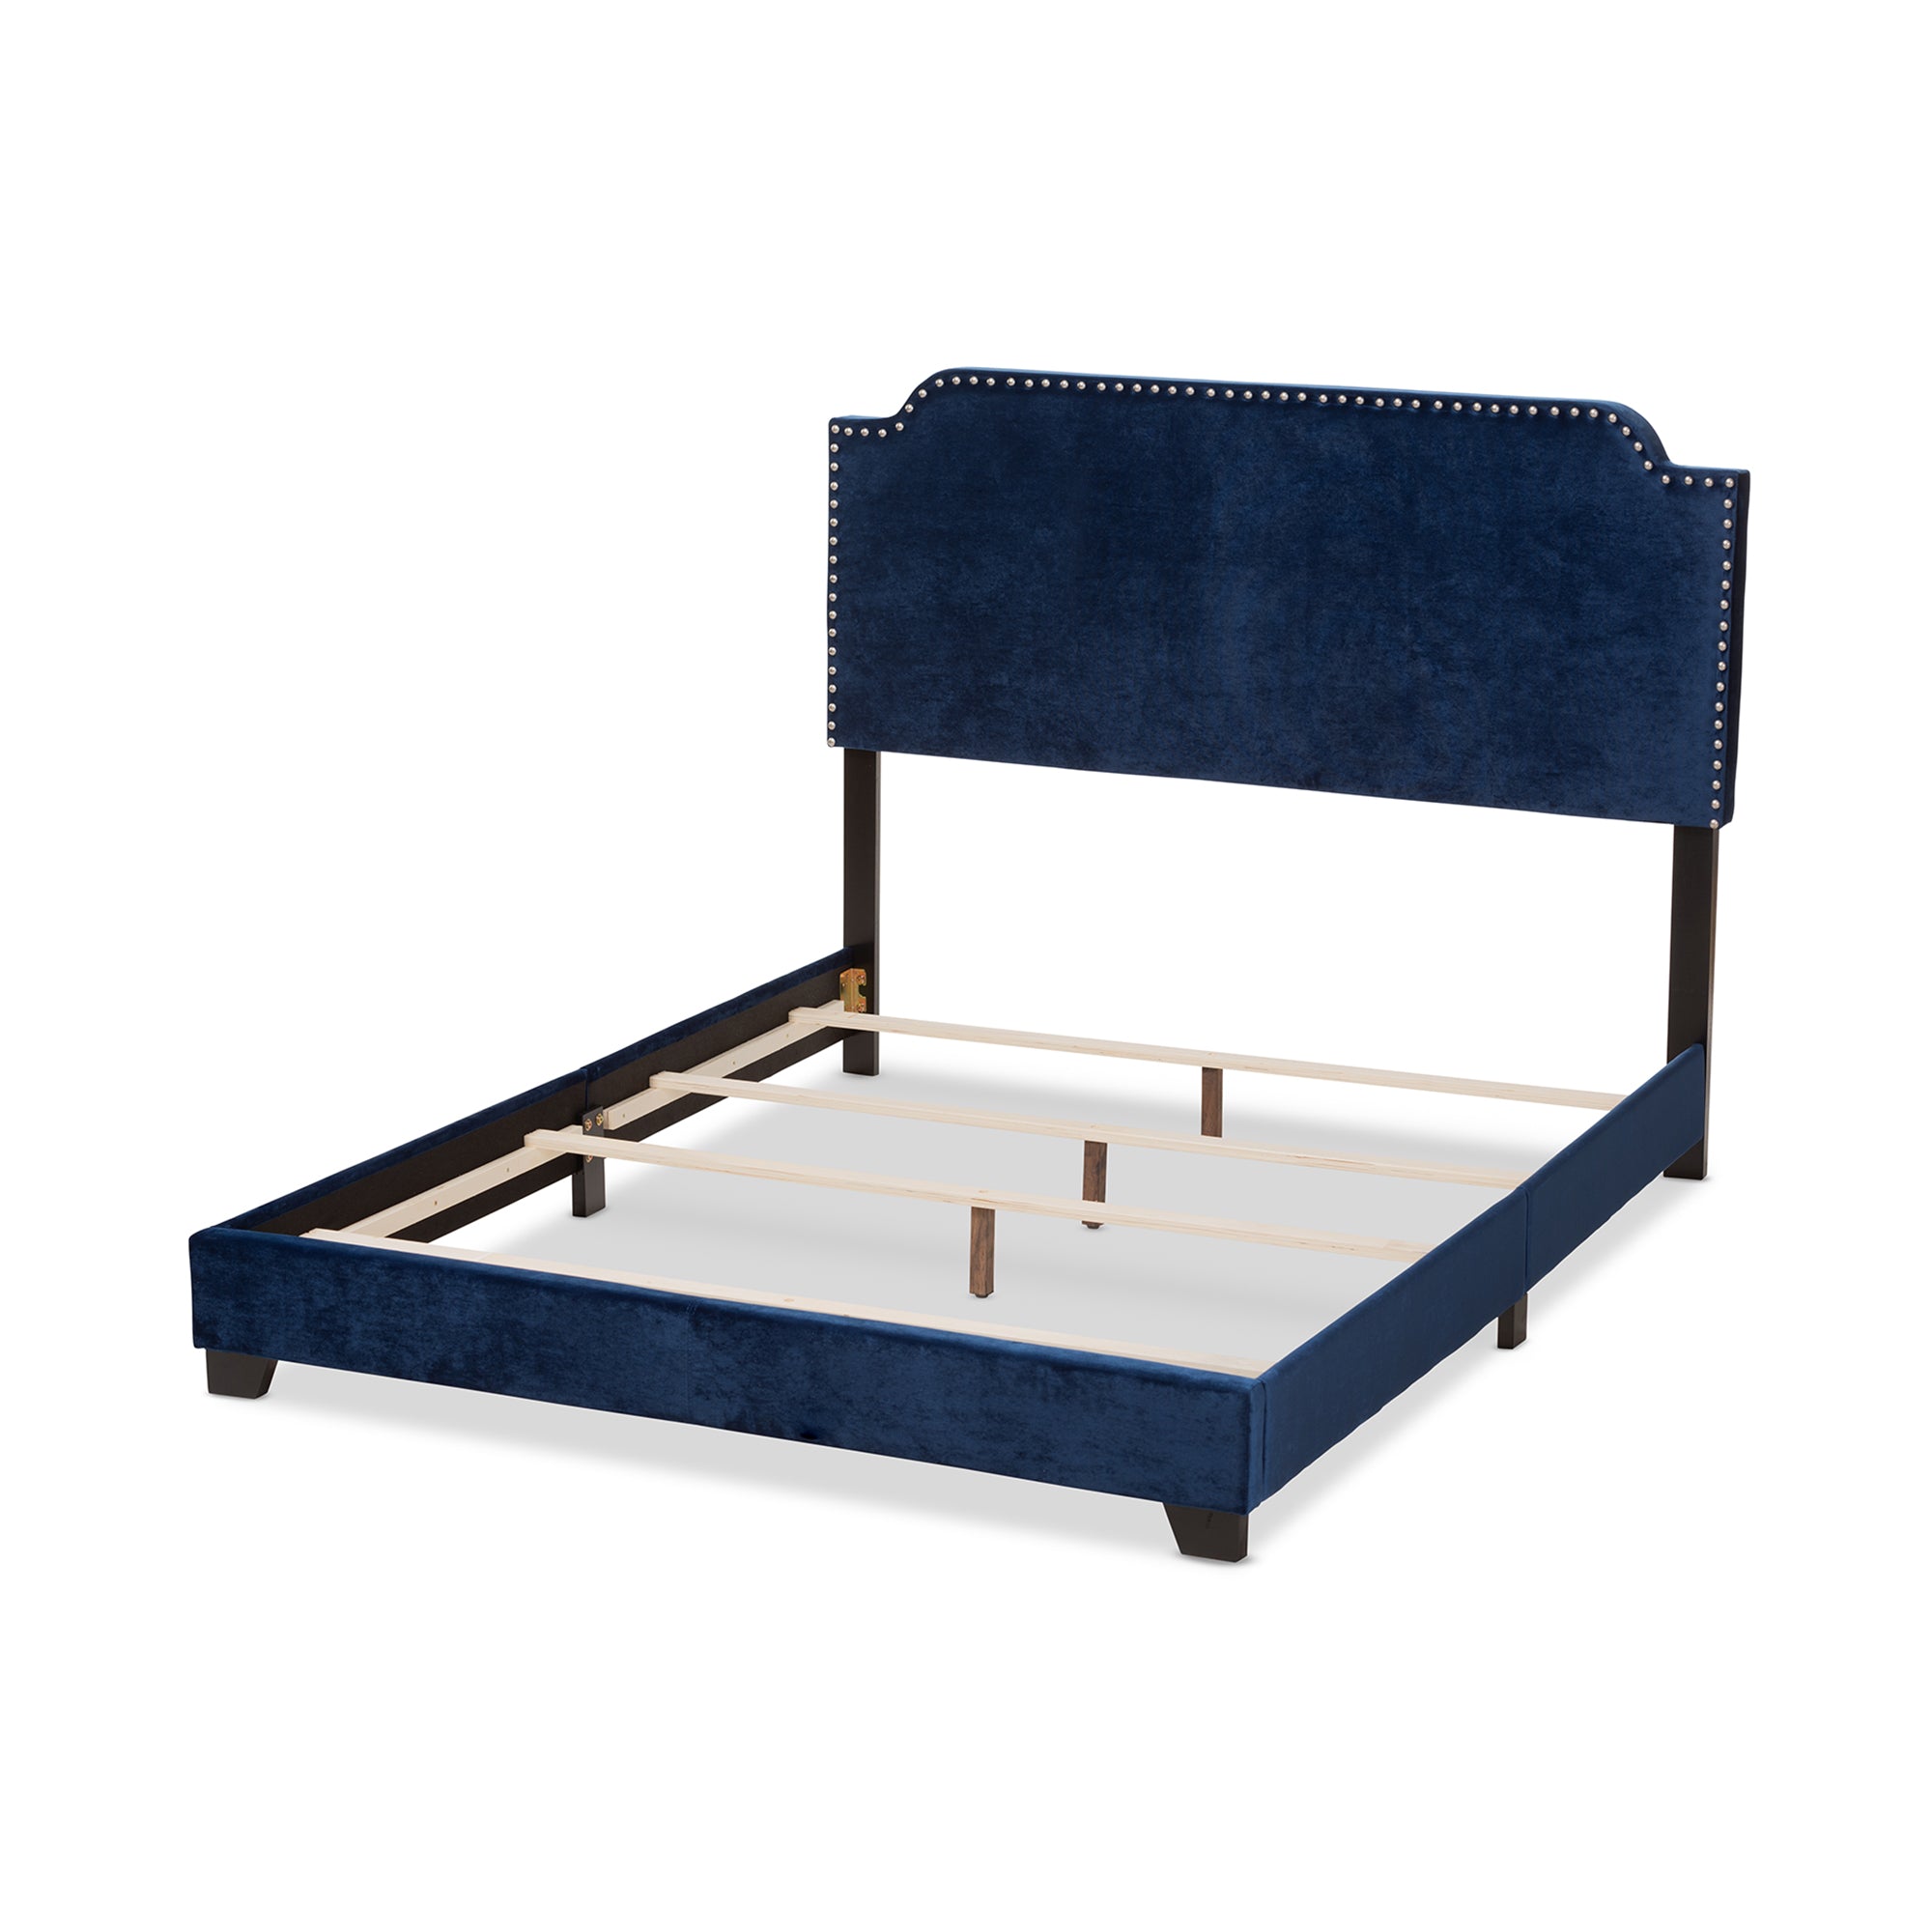 Darcy Glam Bed-Bed-Baxton Studio - WI-Wall2Wall Furnishings